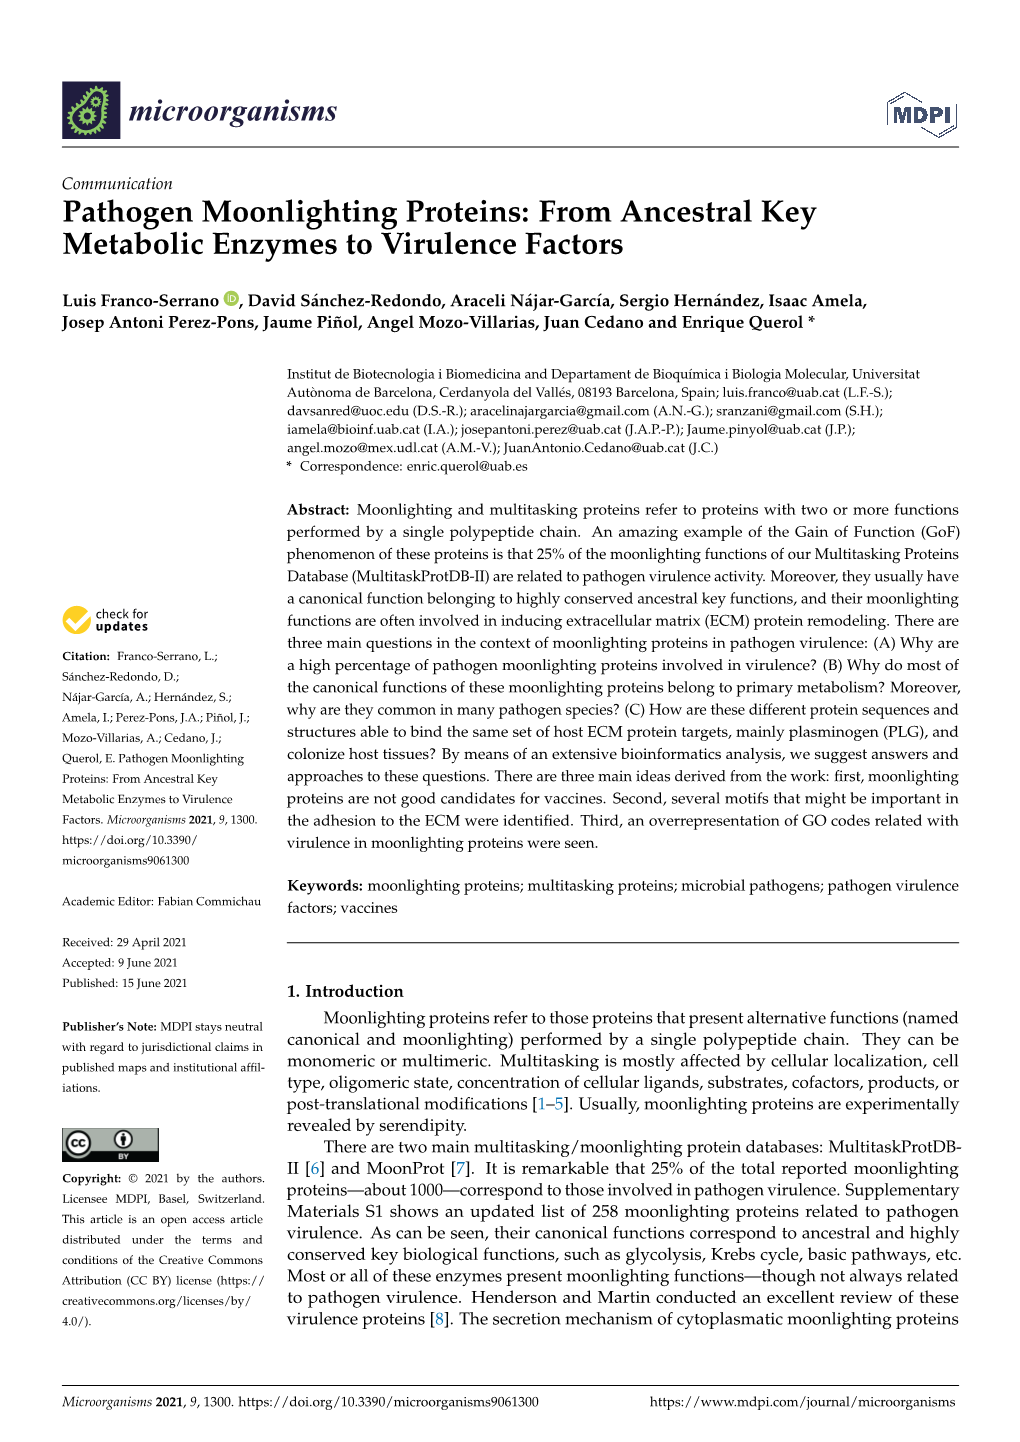 Pathogen Moonlighting Proteins: from Ancestral Key Metabolic Enzymes to Virulence Factors